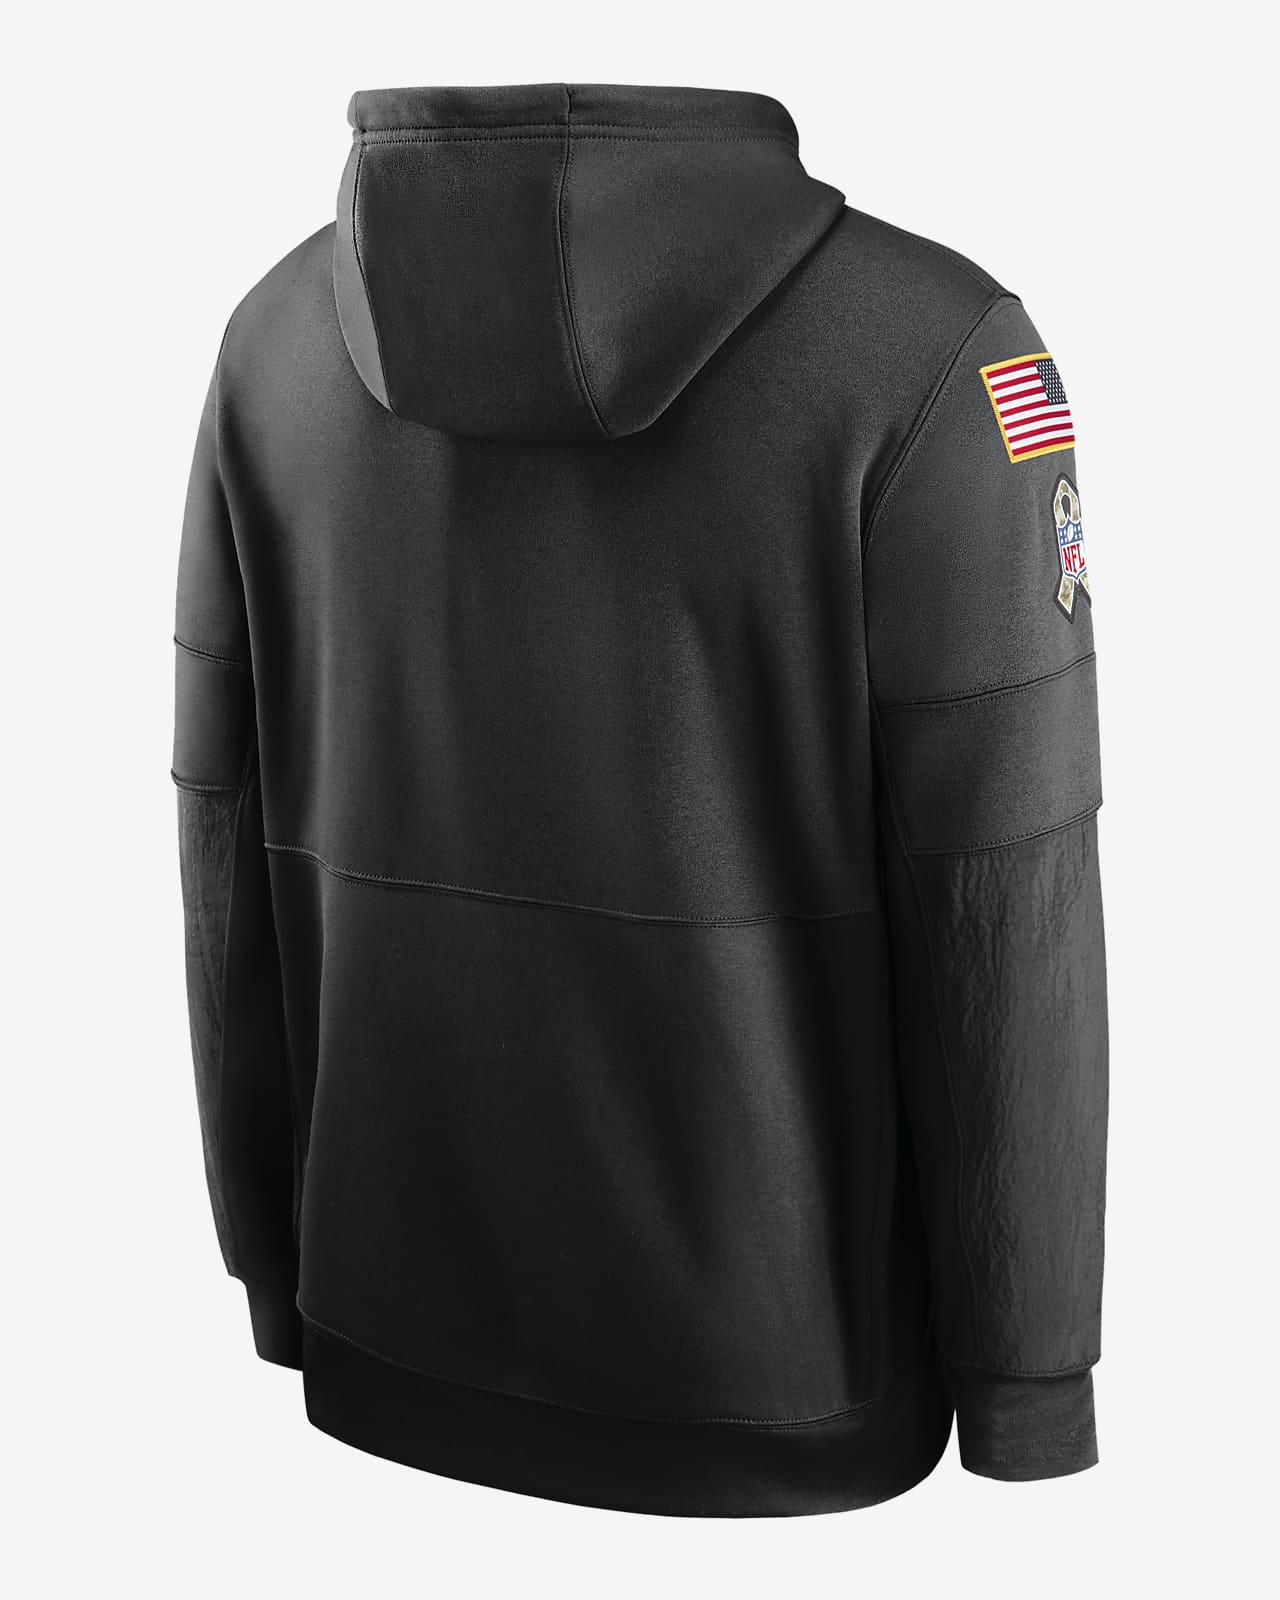 salute to service nfl hoodie